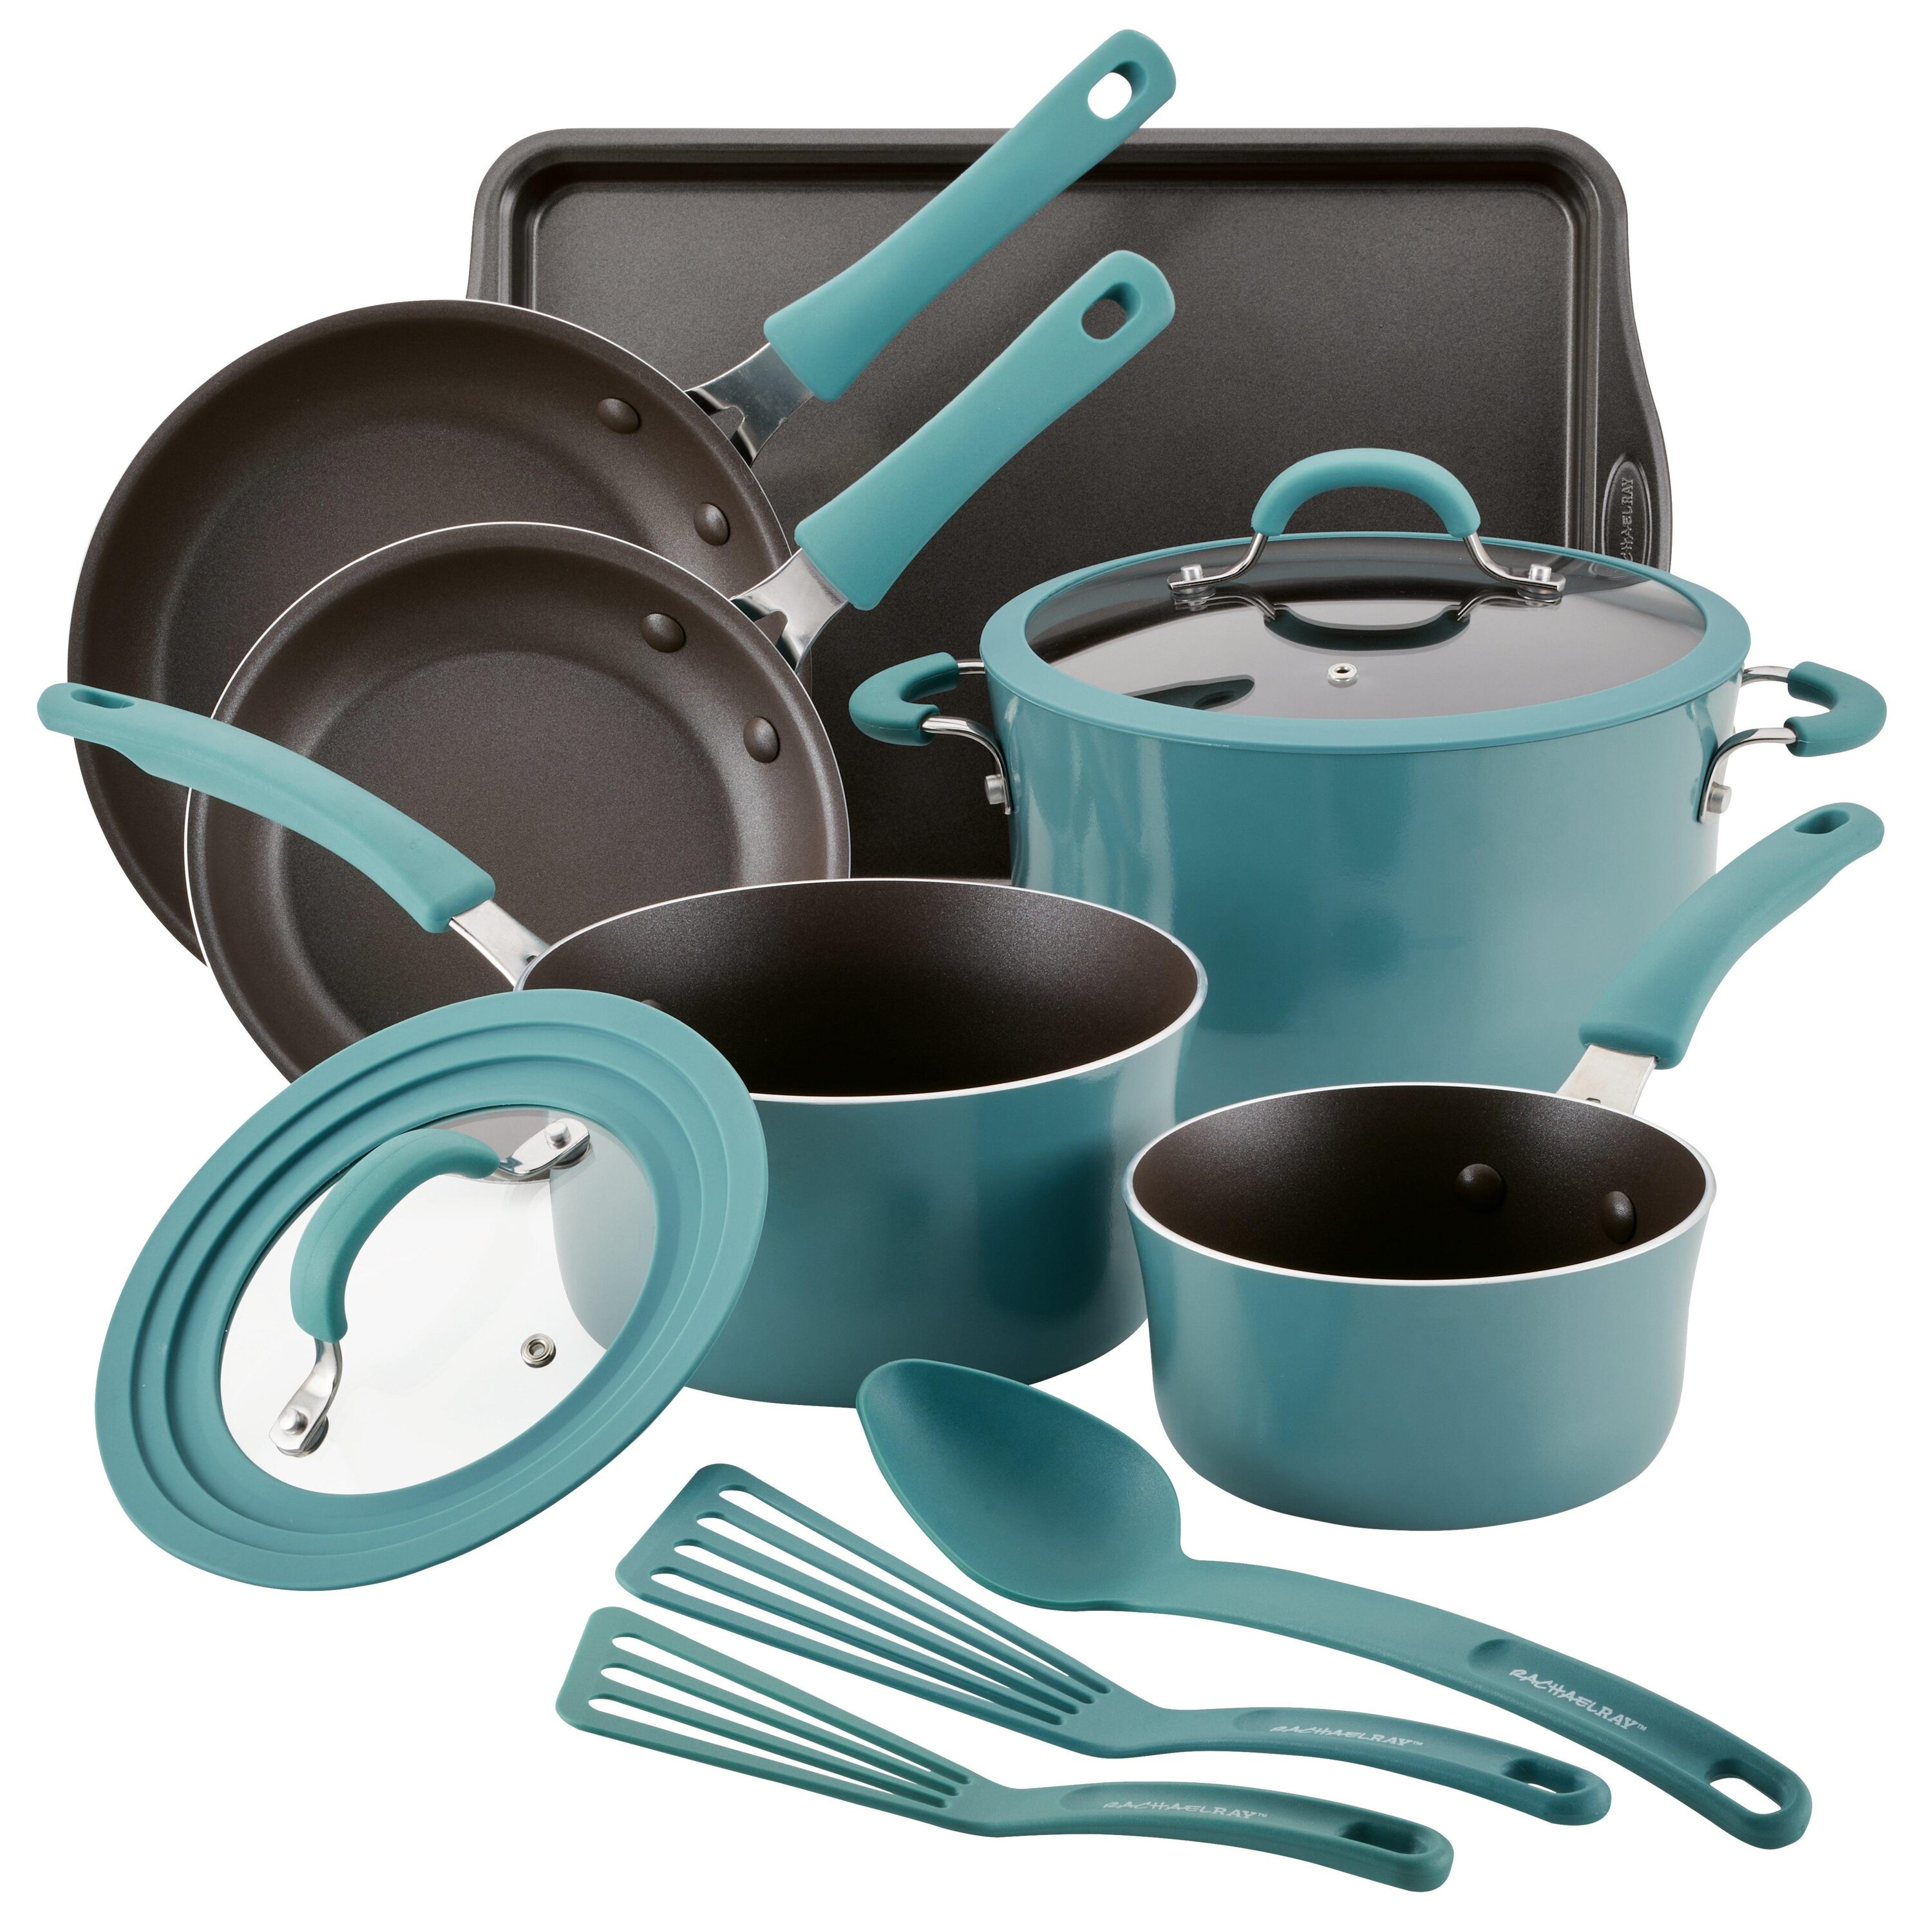 Rachael Ray Create Delicious Aluminum Nonstick Cookware Set 13-Piece Teal Shimmer